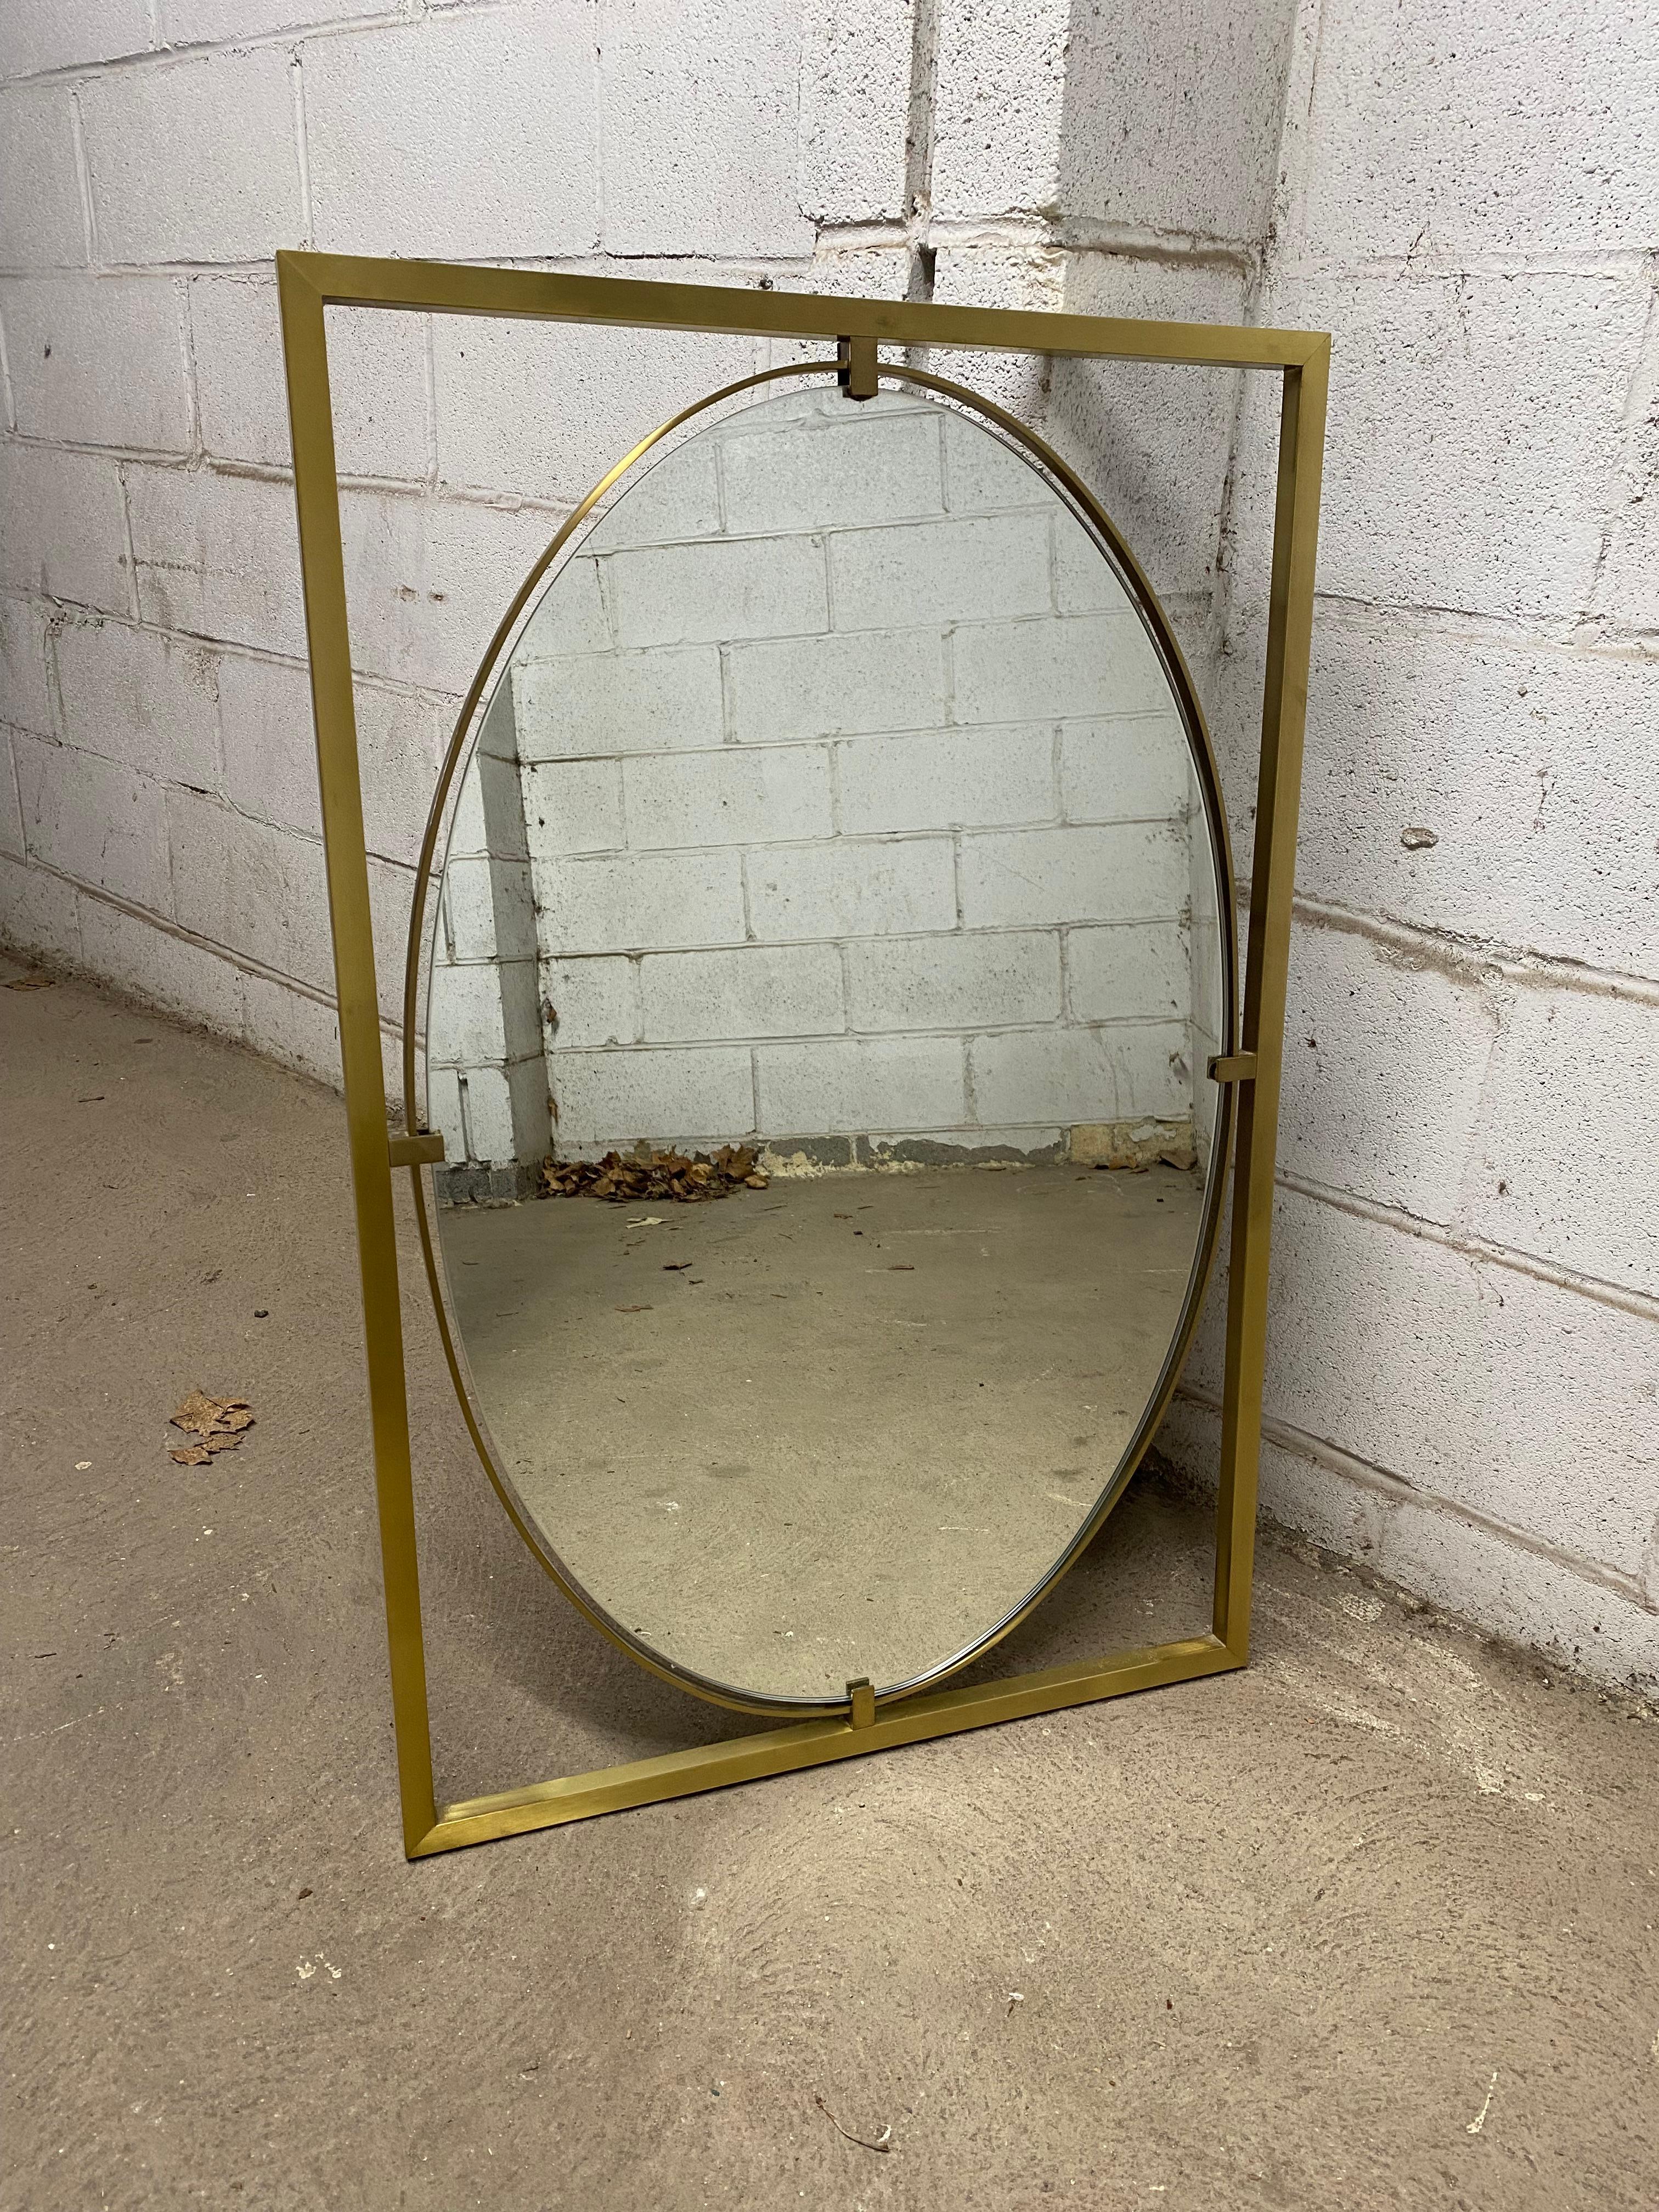 Rectangular square stock brass finished brushed aluminum frame. The frame surrounds a beveled edge oval mirror. Circa 1960-65. Good overall condition. No visible chips or dings to the glass. The aluminum frame is in good condition with minor wear